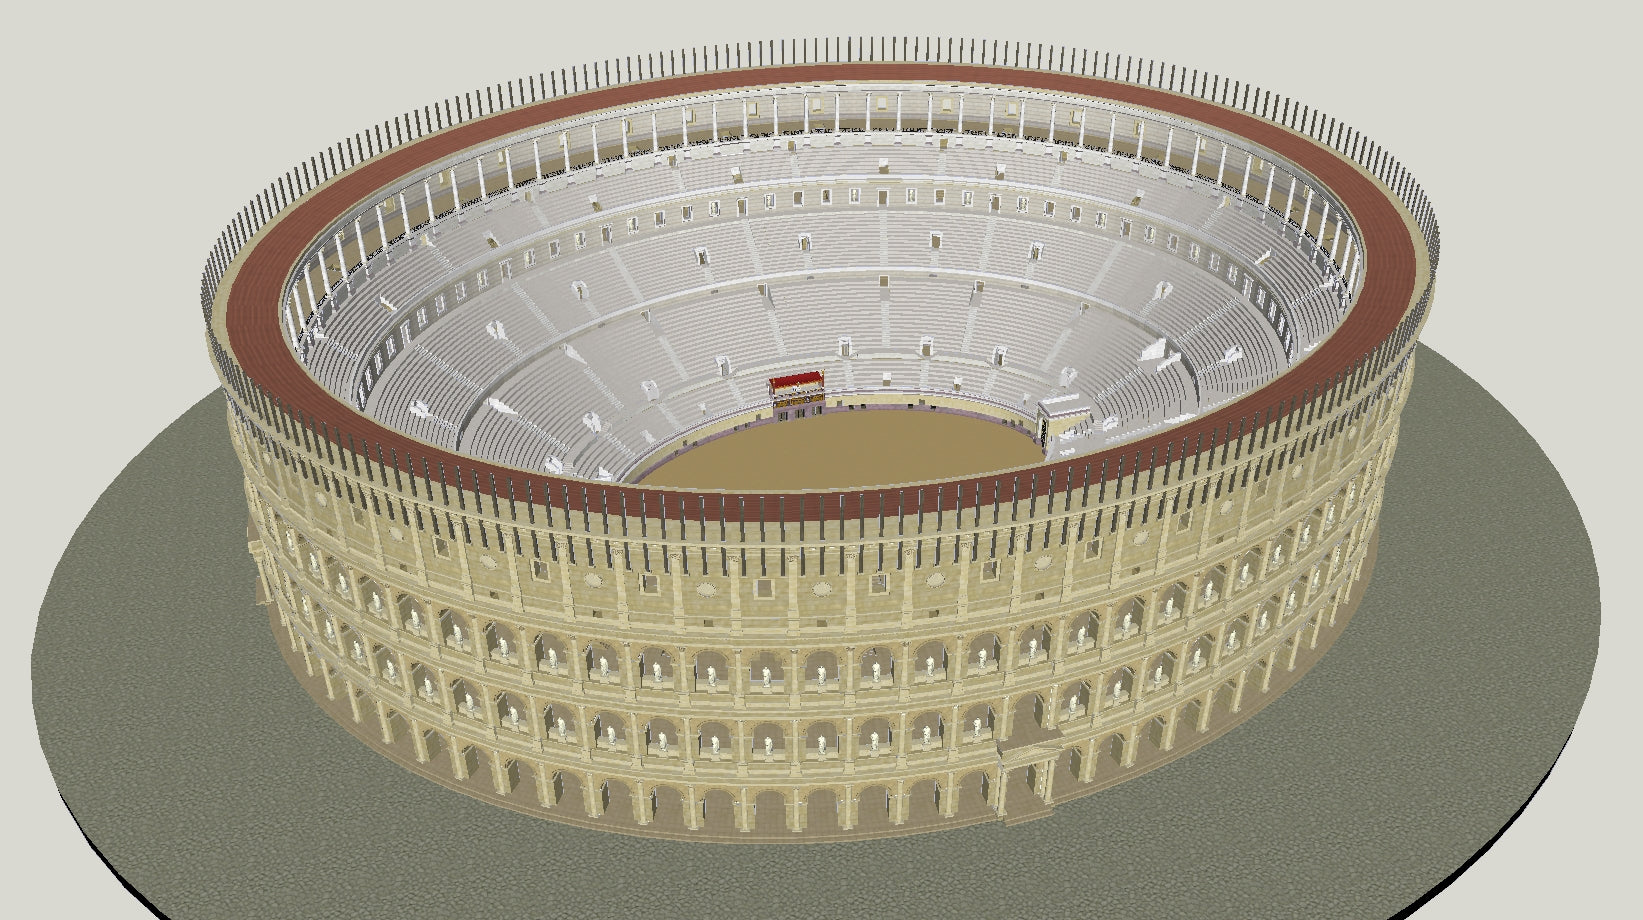 💎【Sketchup Architecture 3D Projects】Ancient roman architecture model- Sketchup 3D Models V1